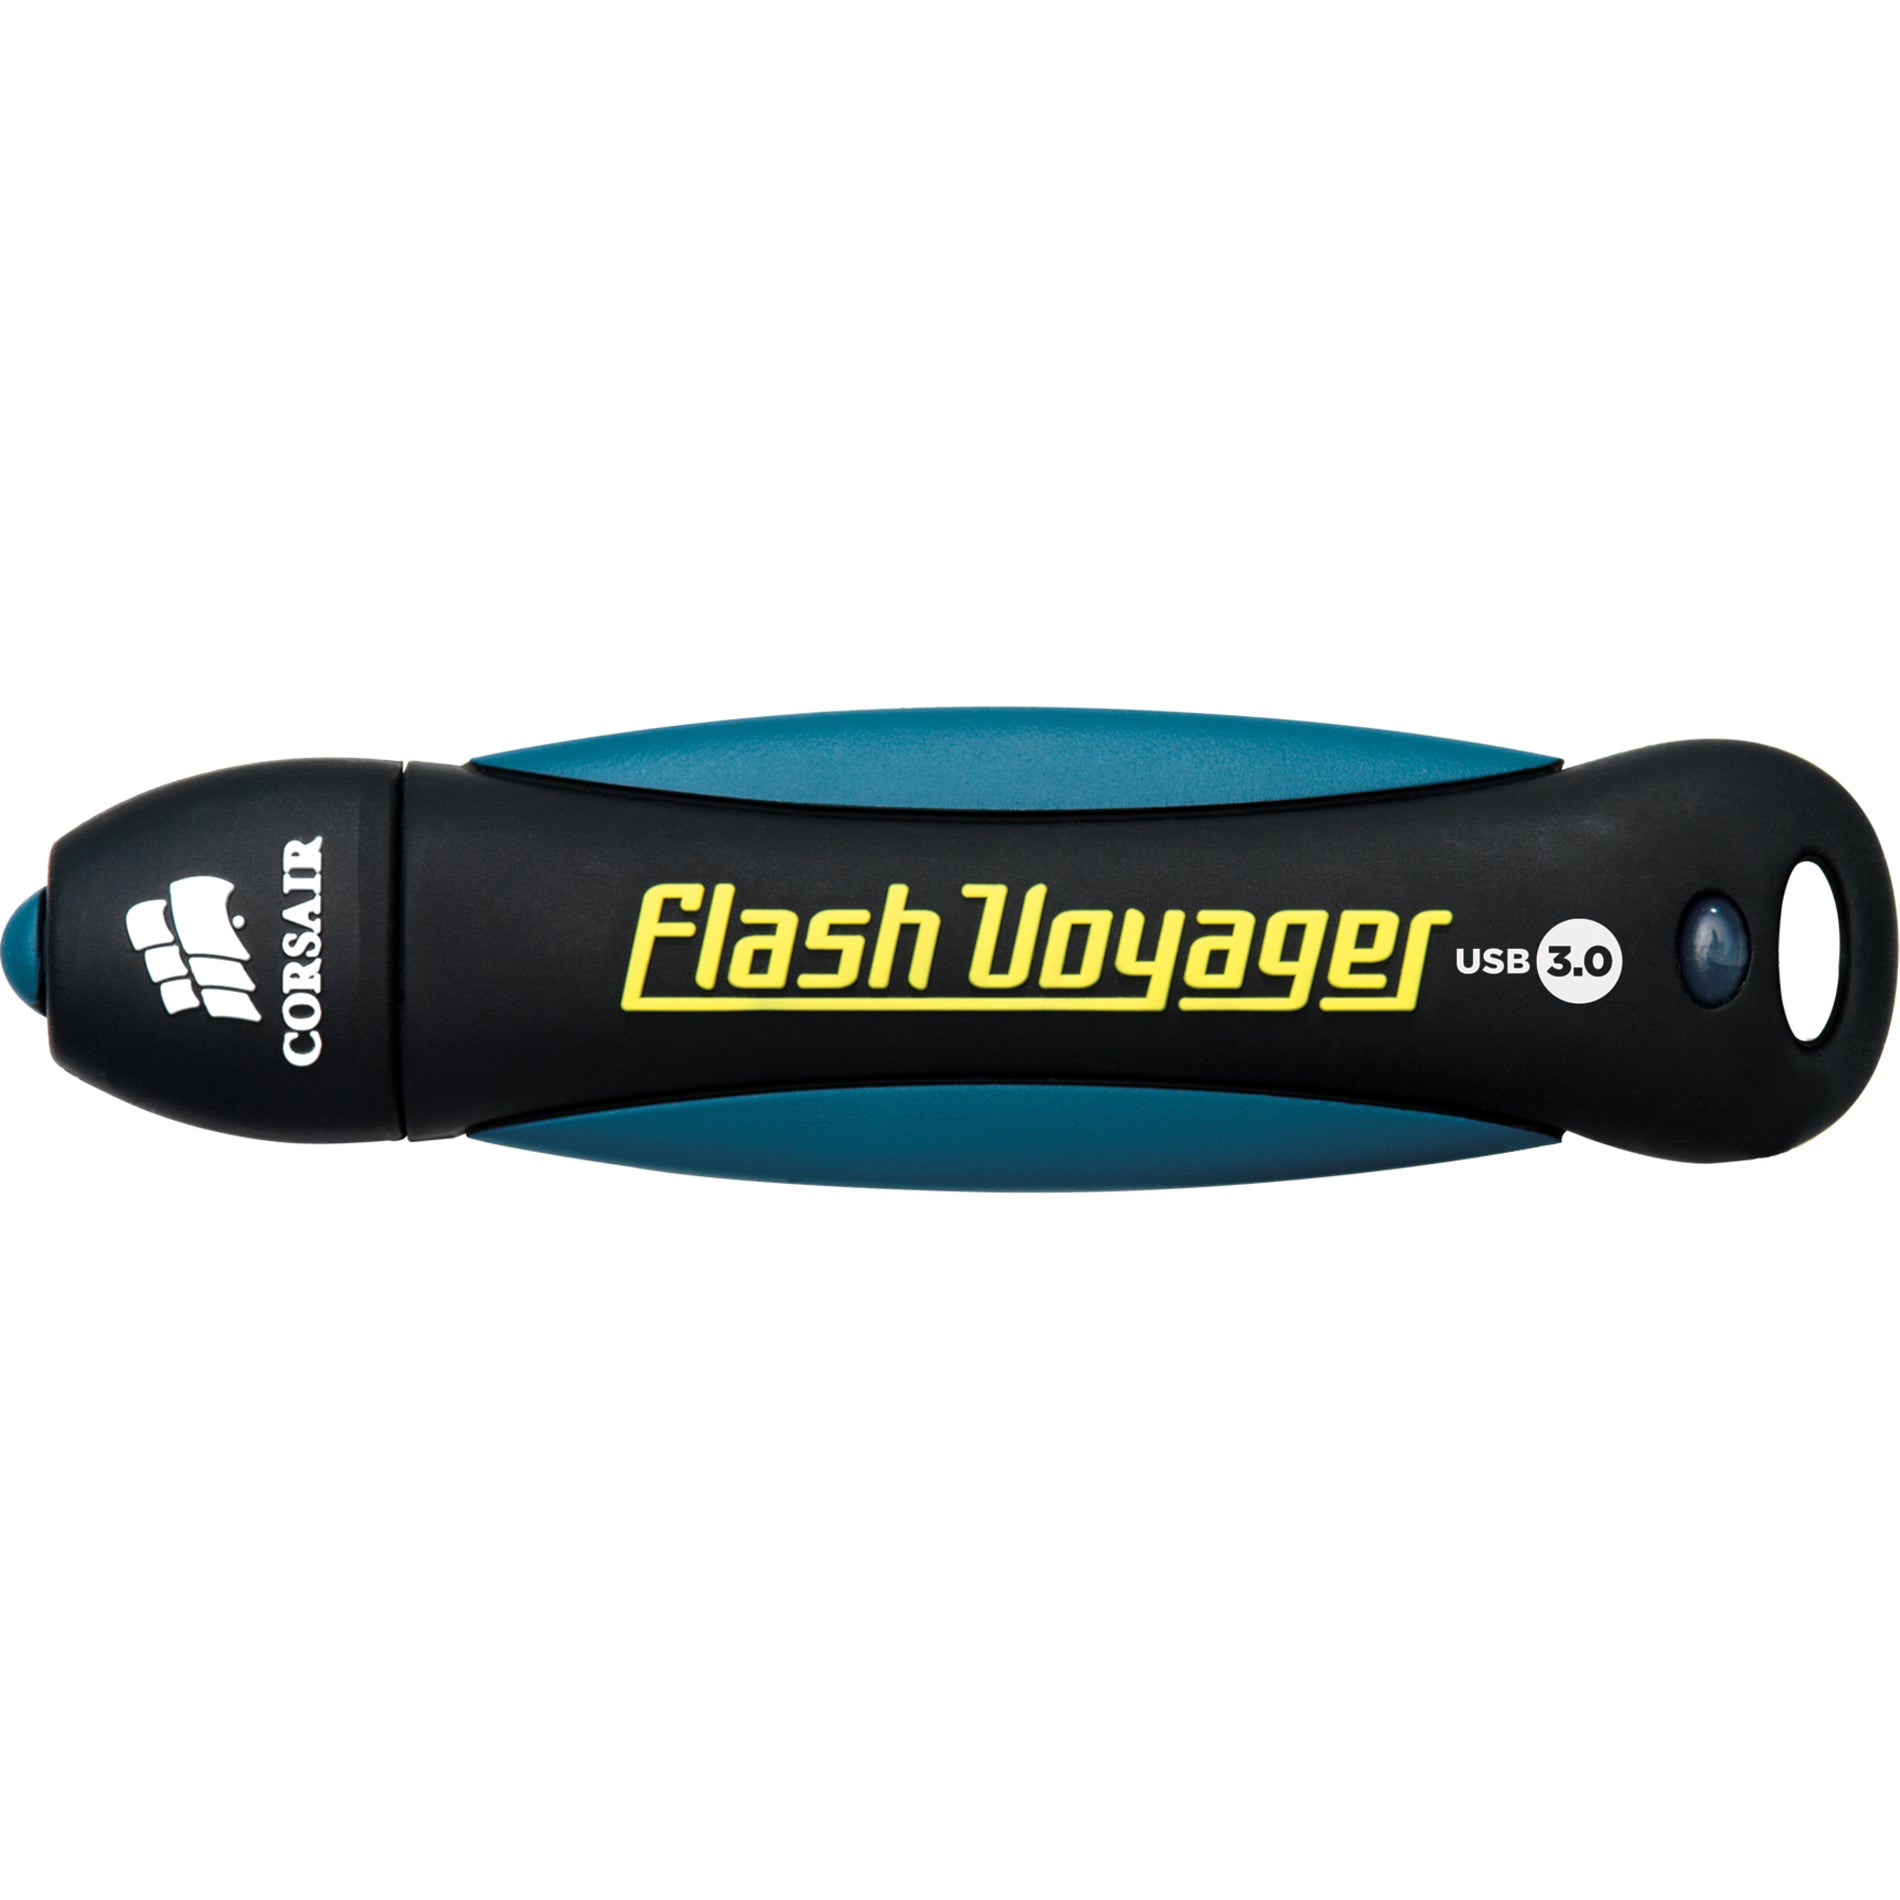 Corsair CMFVY3A-128GB Flash Voyager USB 3.0 Flash Drive, 128GB Storage, Shock Proof, Water Resistant